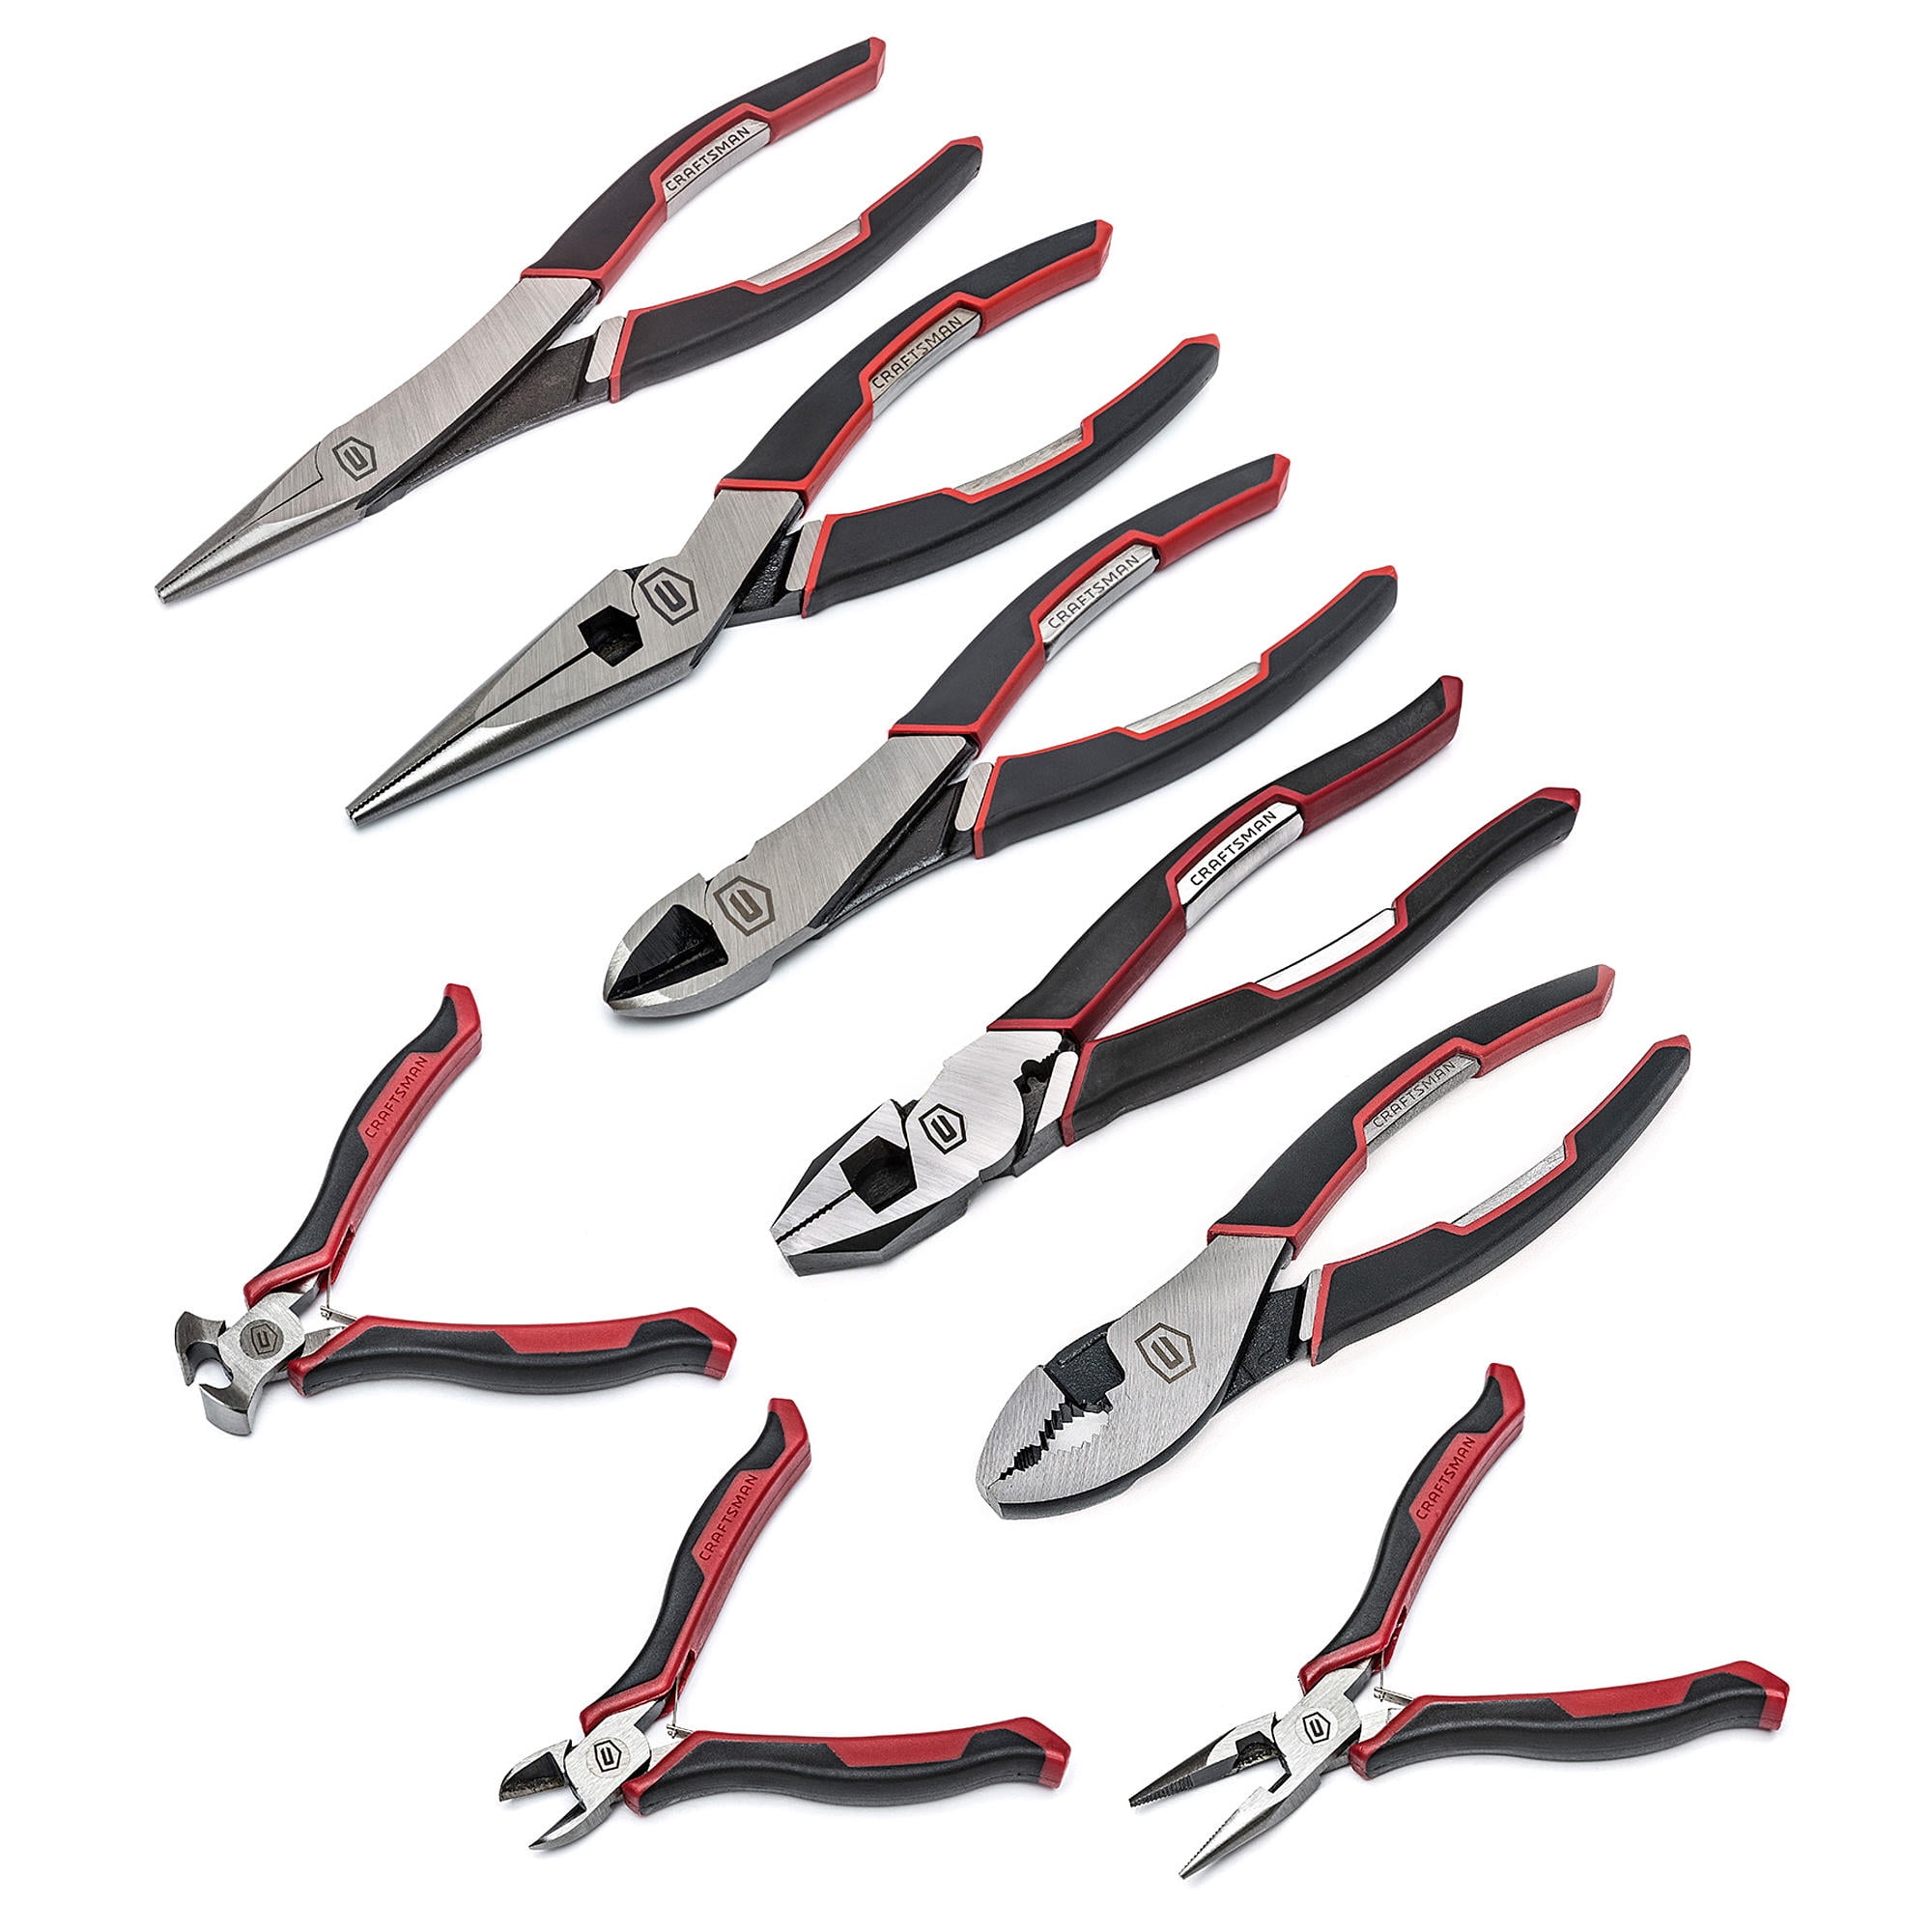 Professional Hand Tools 8 PCS Jewelry Pliers Set with Non-Skid Handles for  Tradesman, Artisans, Diyers - China Plier, Carbon Steel